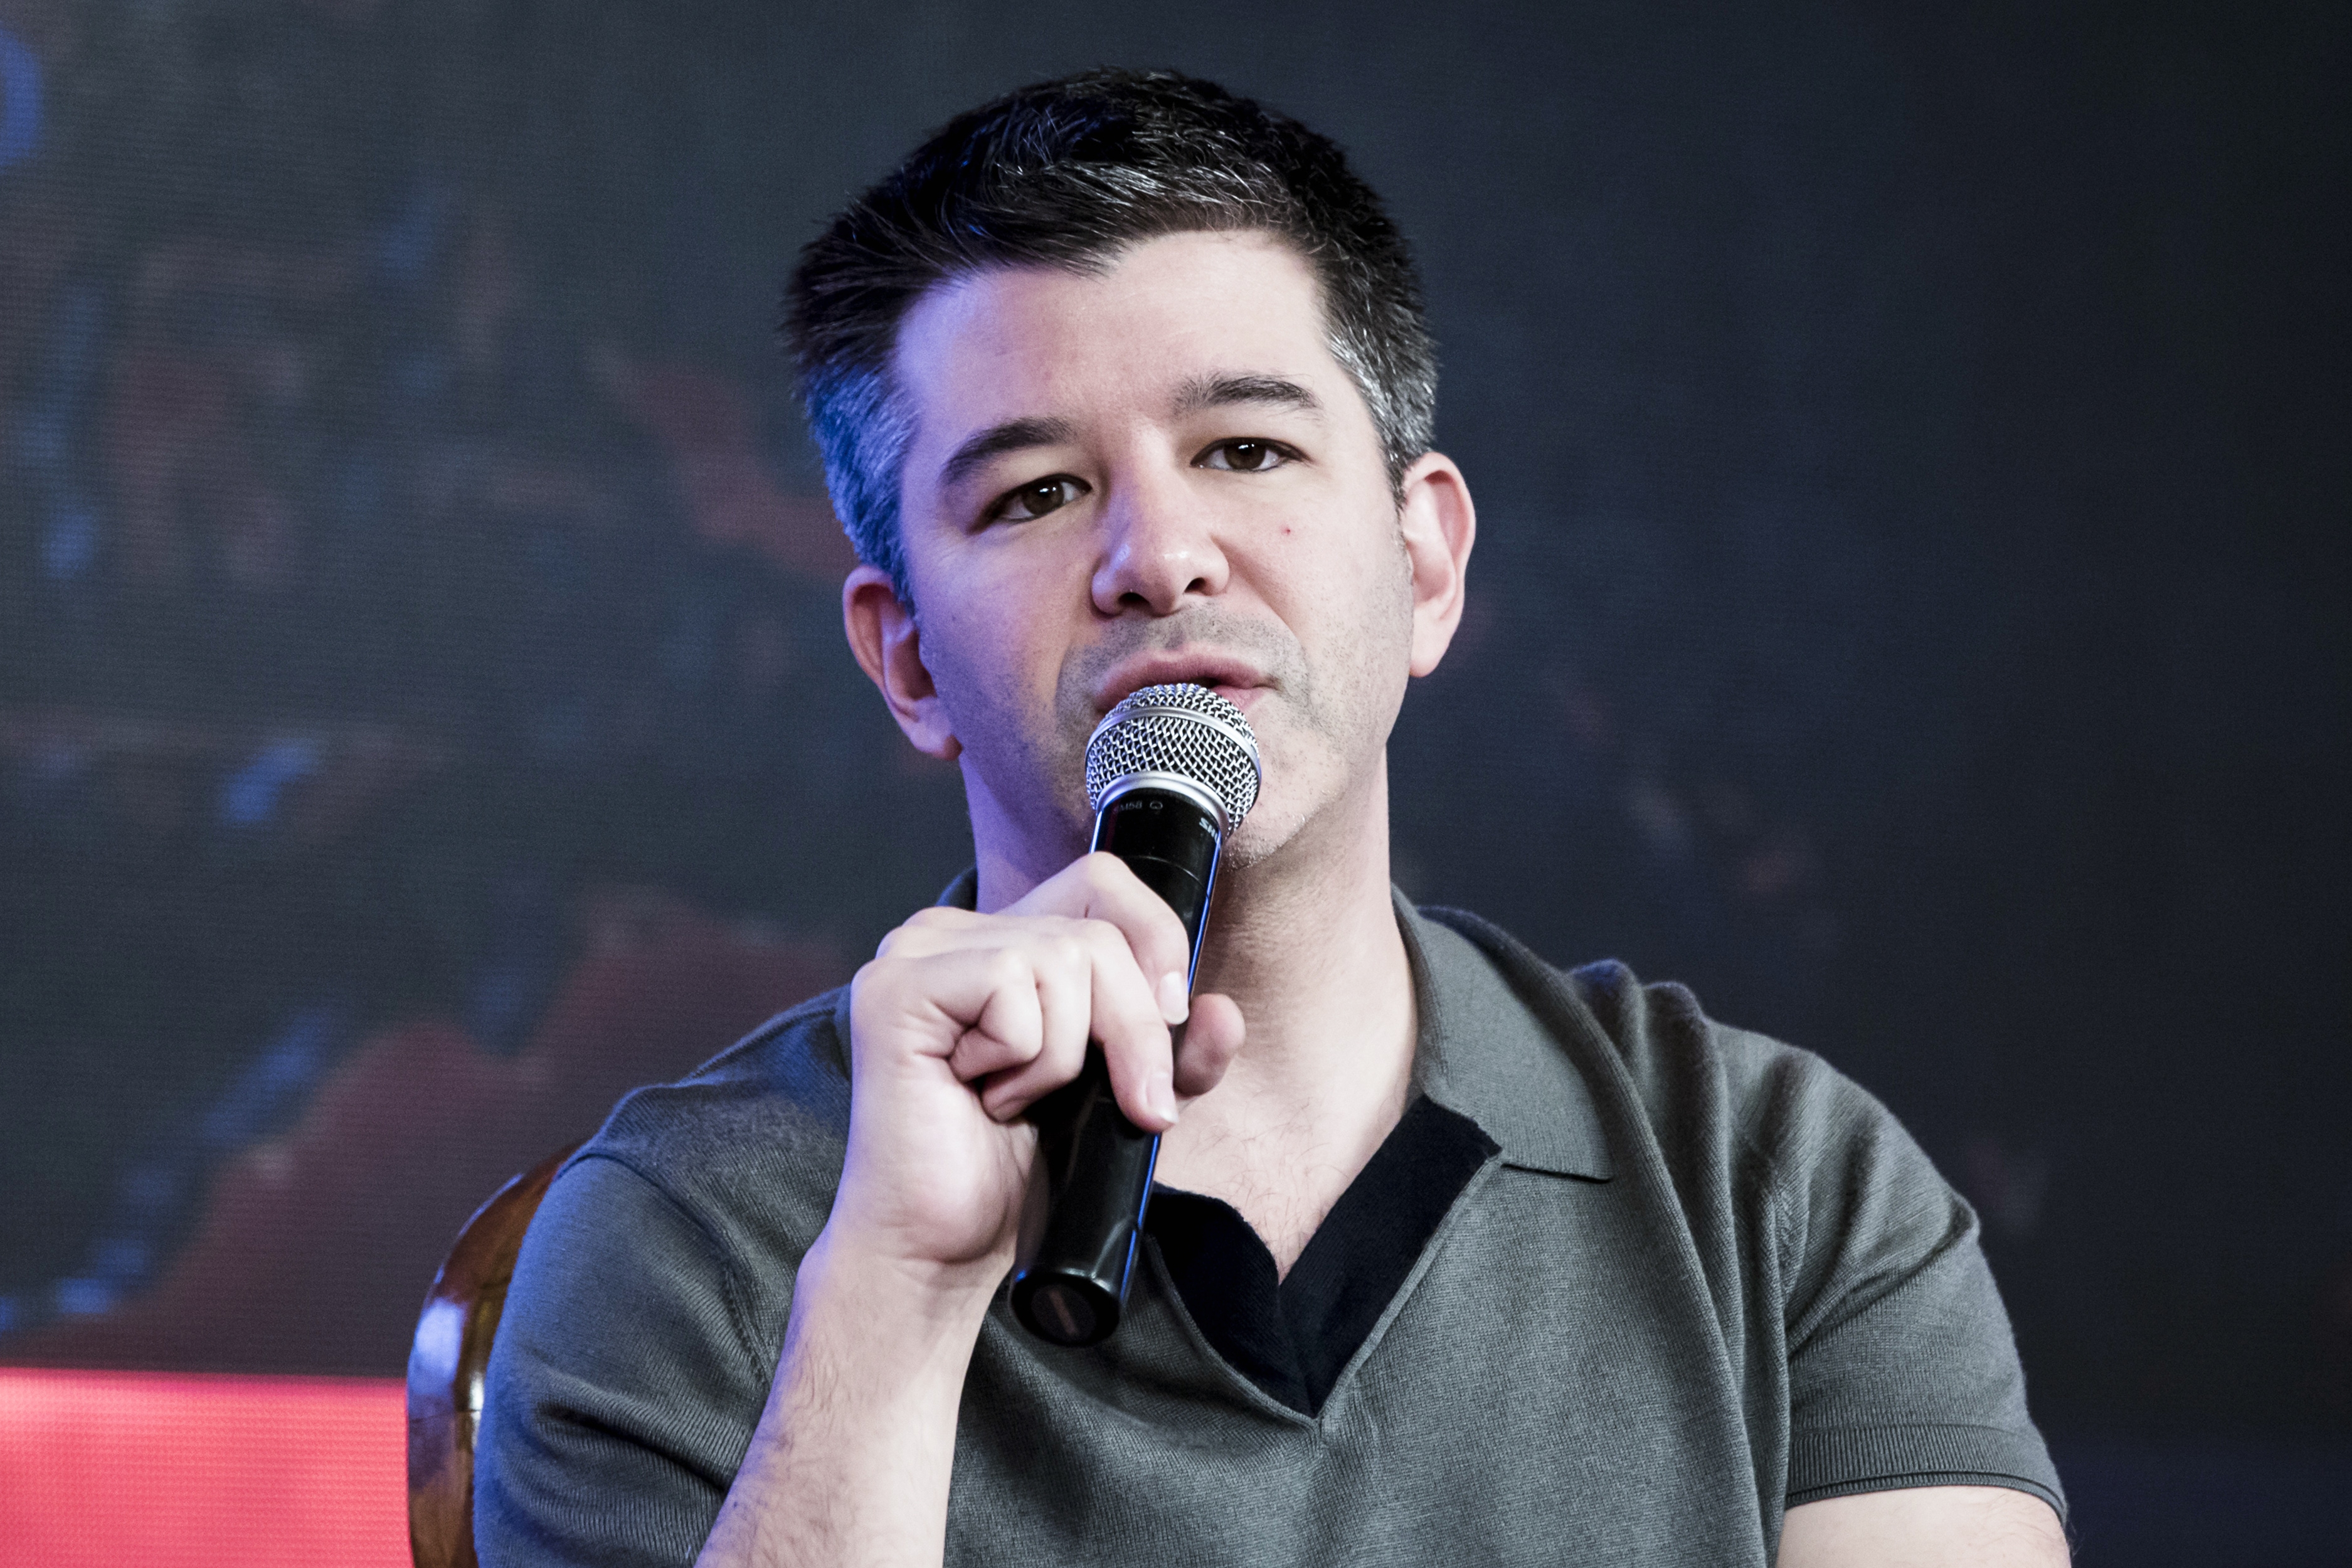 Travis Kalanick, co-founder and chief executive officer of Uber Technologies Inc., speaks during th TiE Global Entrepeneurs Summit in New Delhi, India, on Friday, Dec. 16, 2016. (Udit Kulshrestha—Bloomberg via Getty Images)